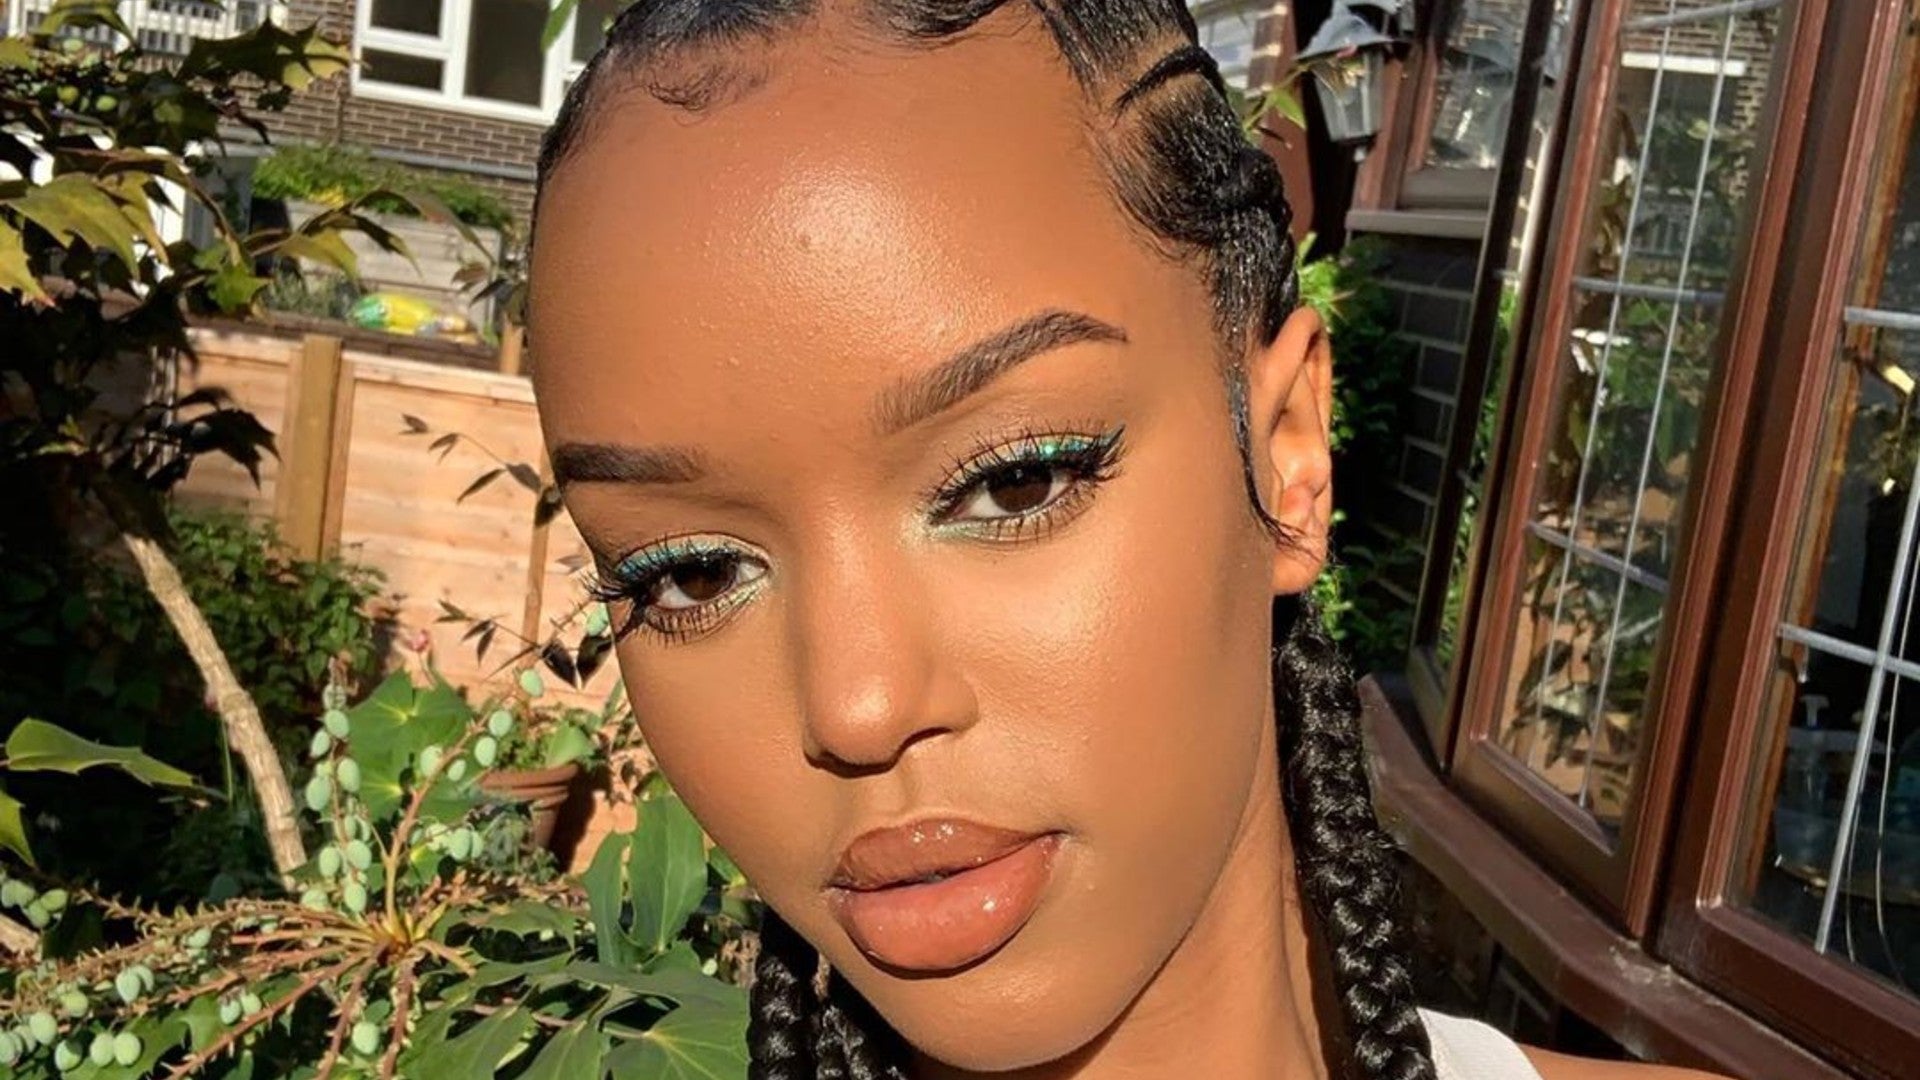 This Beauty Influencer Gets A Flawless Face With Only Drugstore Makeup